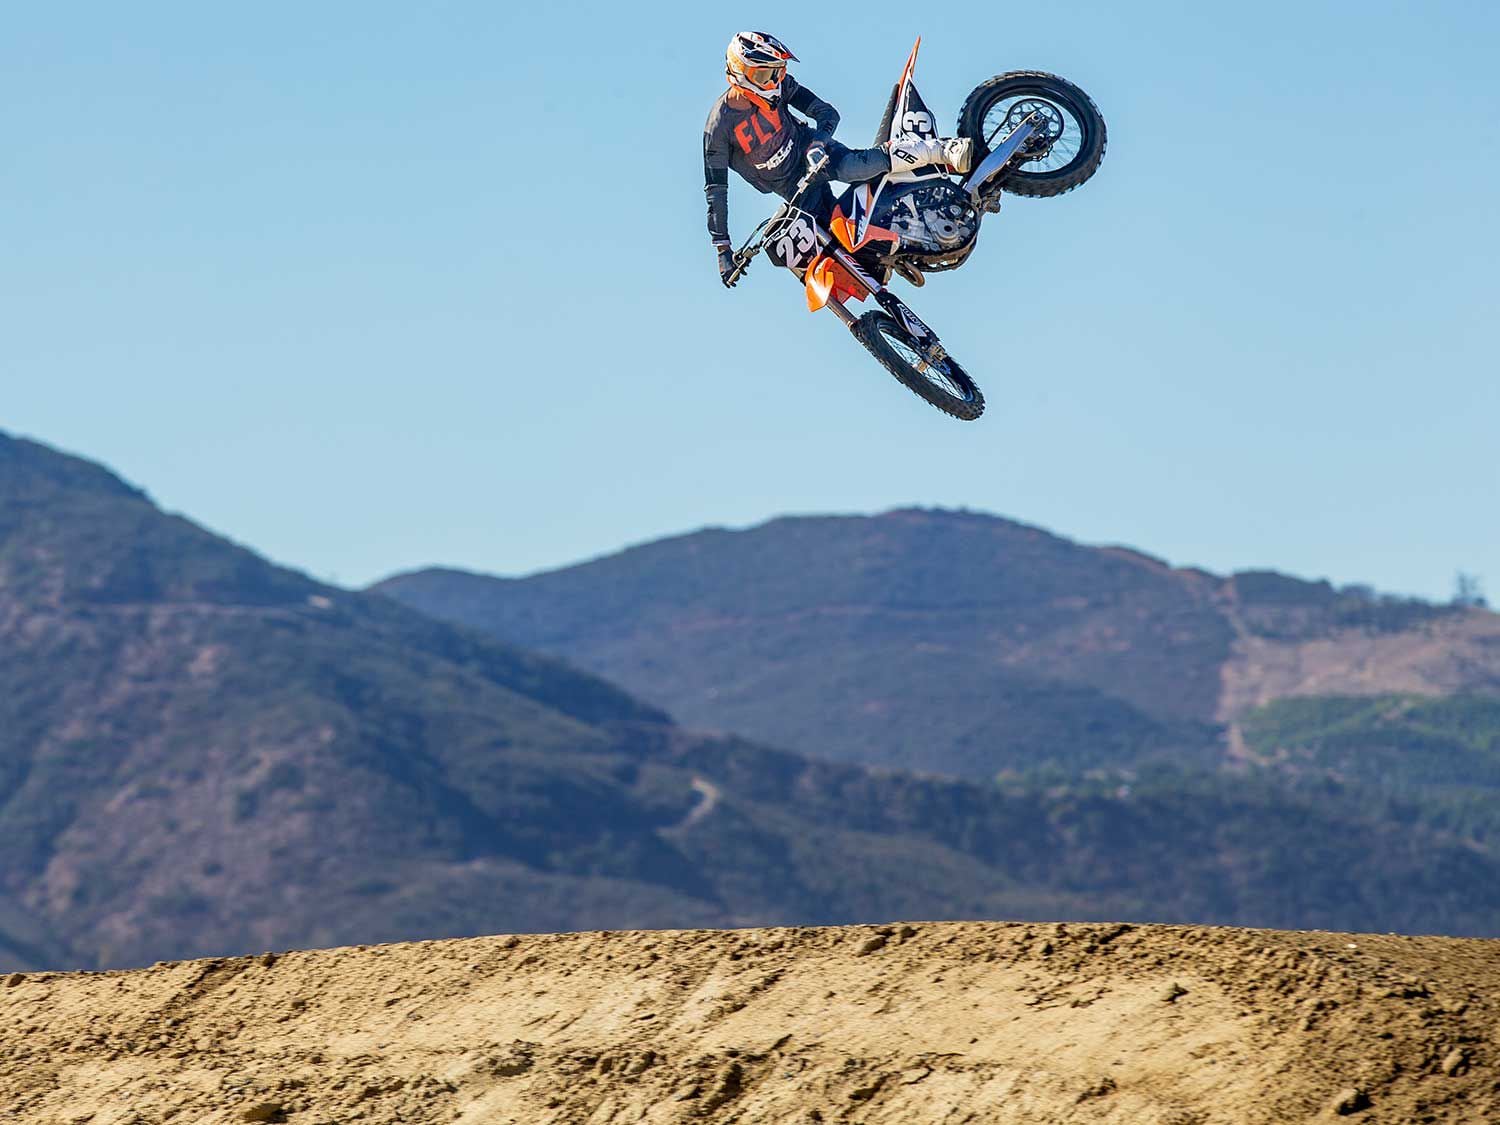 “The WP Xact suspension components on the KTM are plush. They soak up all bumps very well, yet hold up great over big landings and deep in the stroke.” <em>—Tanner Basso</em>